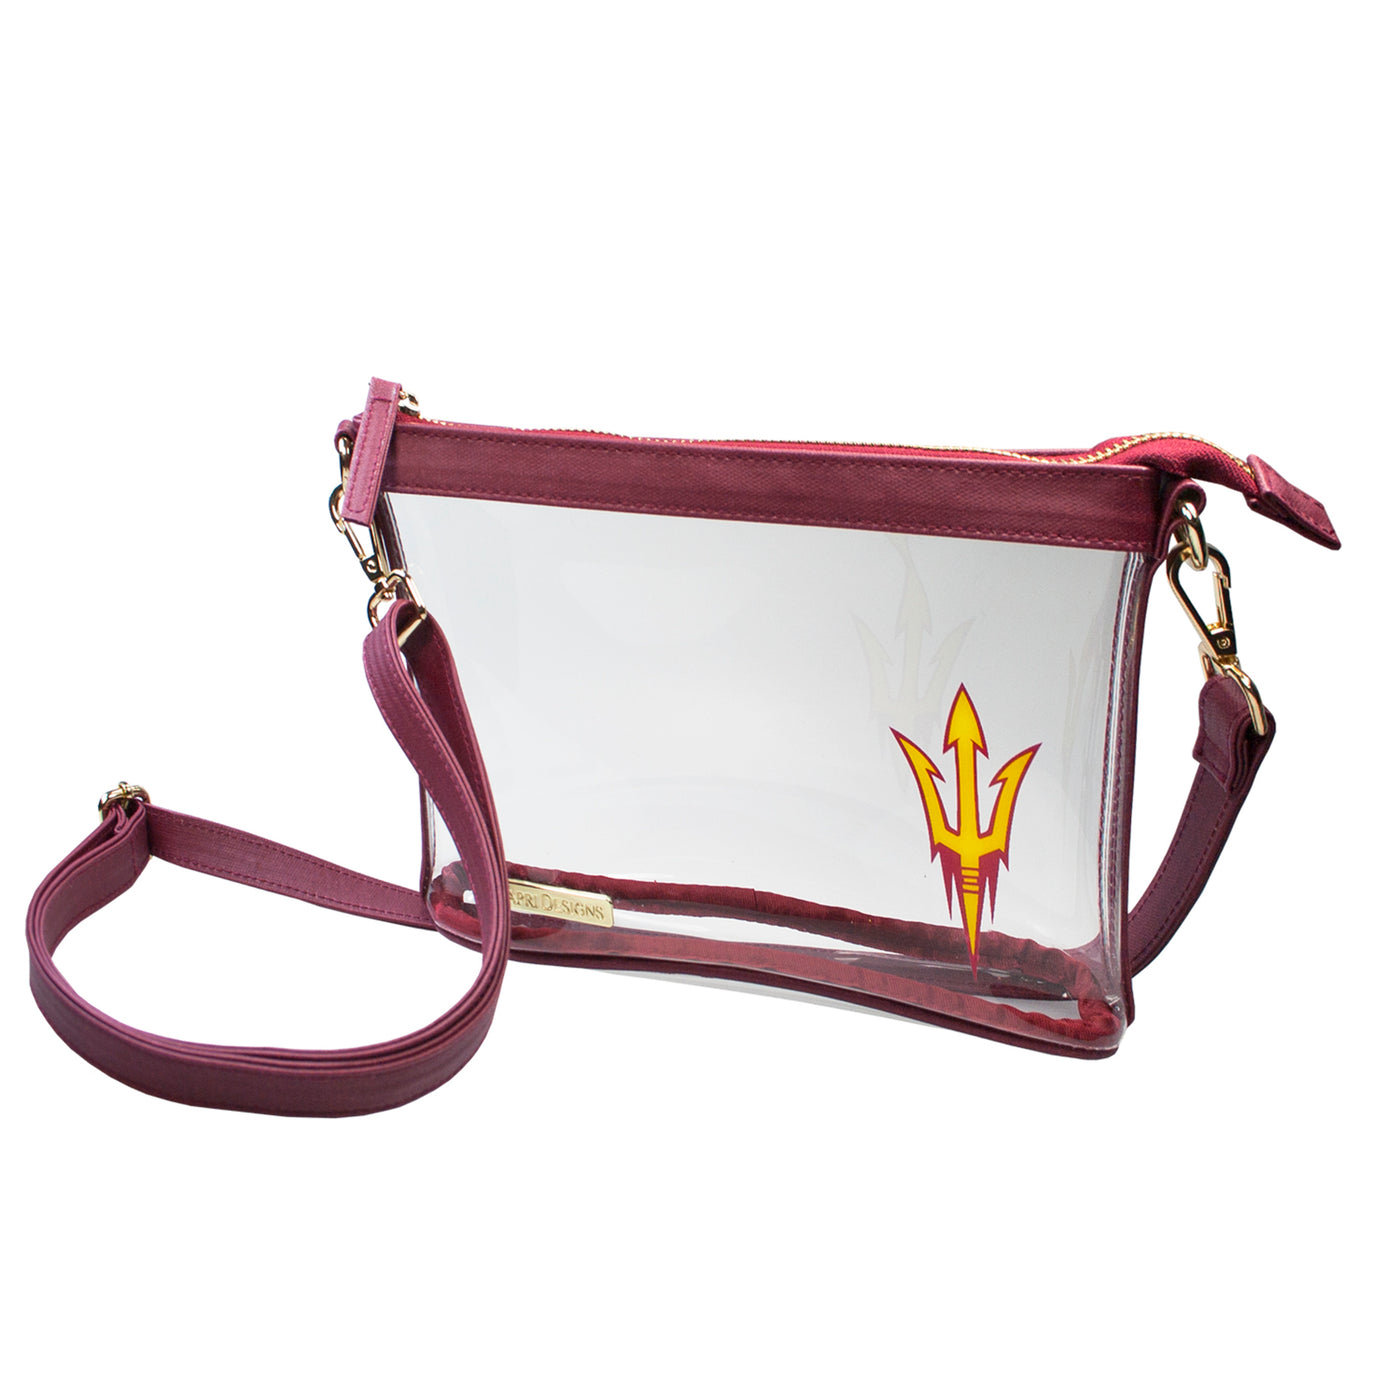 ASU clear bag with maroon details, zipper top, remove-able strap, and a pitchfork on the corner